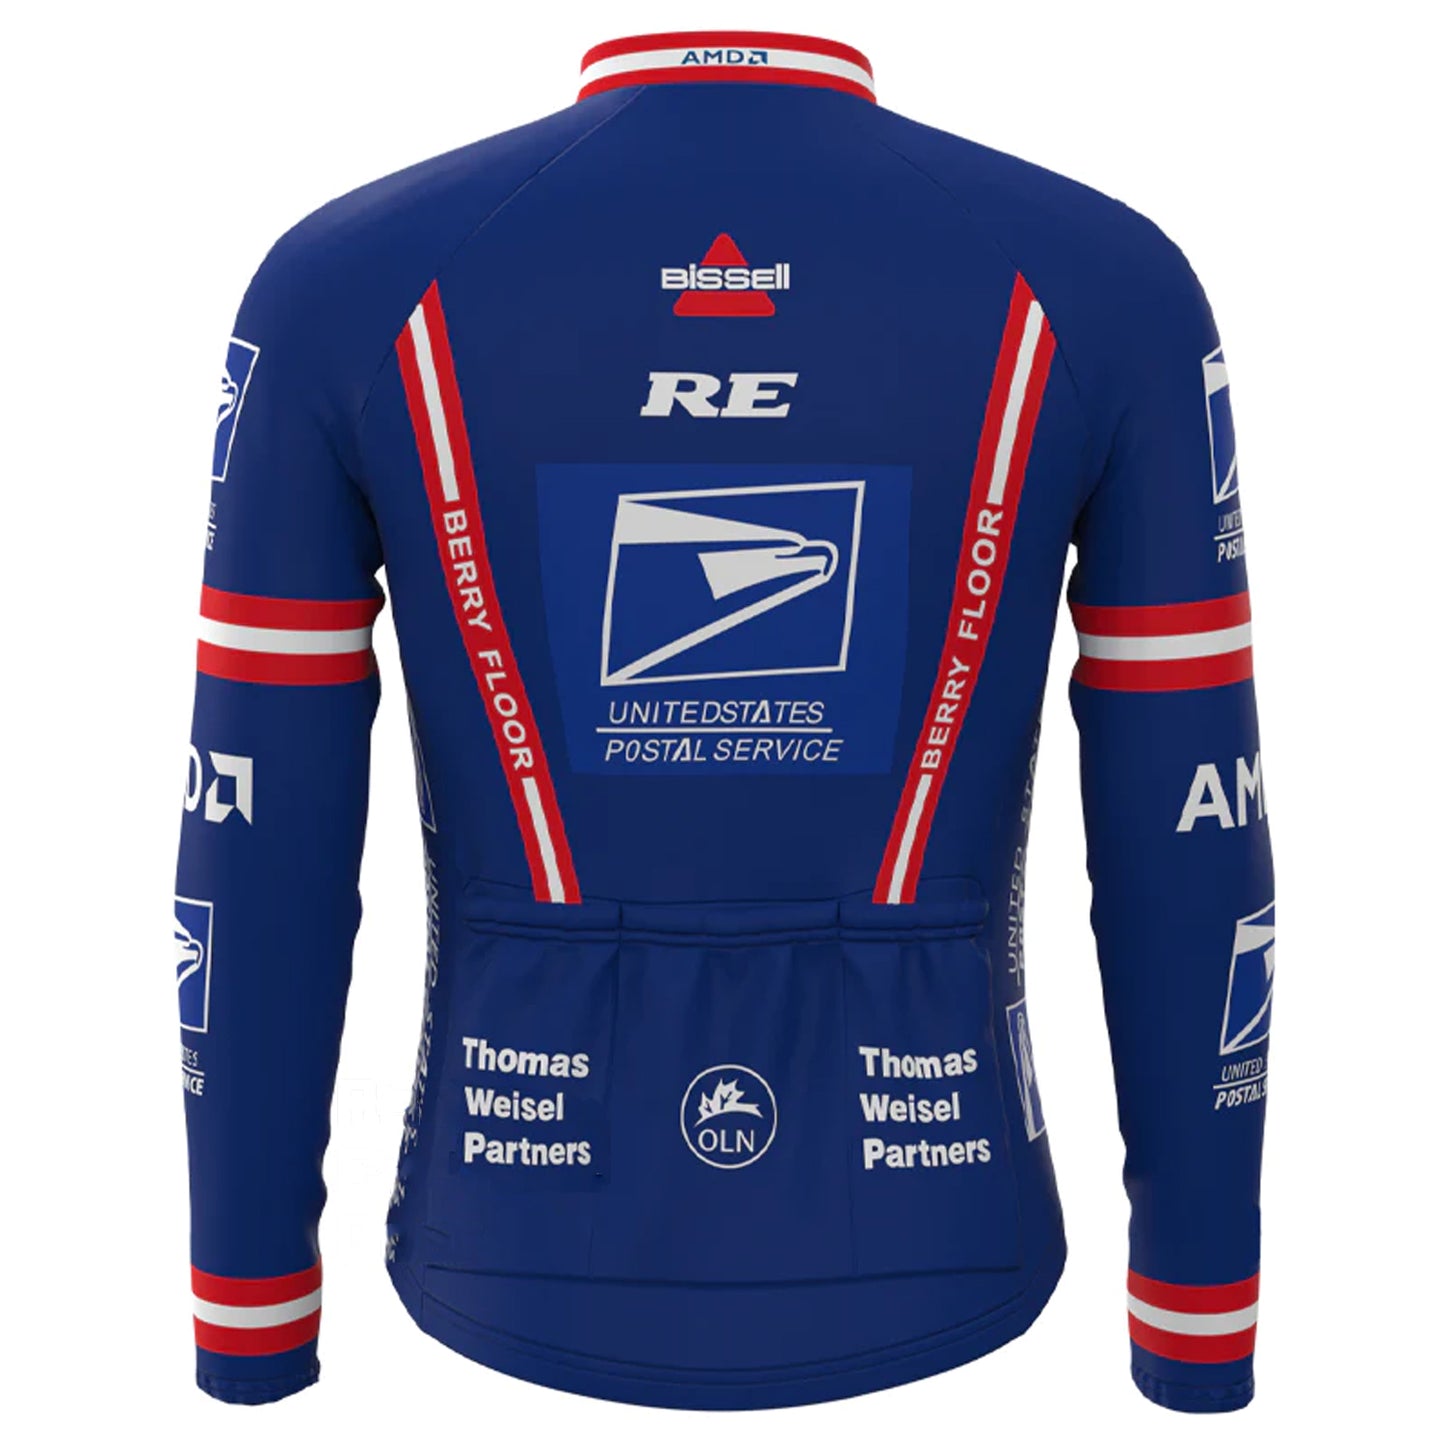 BISSELL Blue Vintage Long Sleeve Cycling Jersey Top